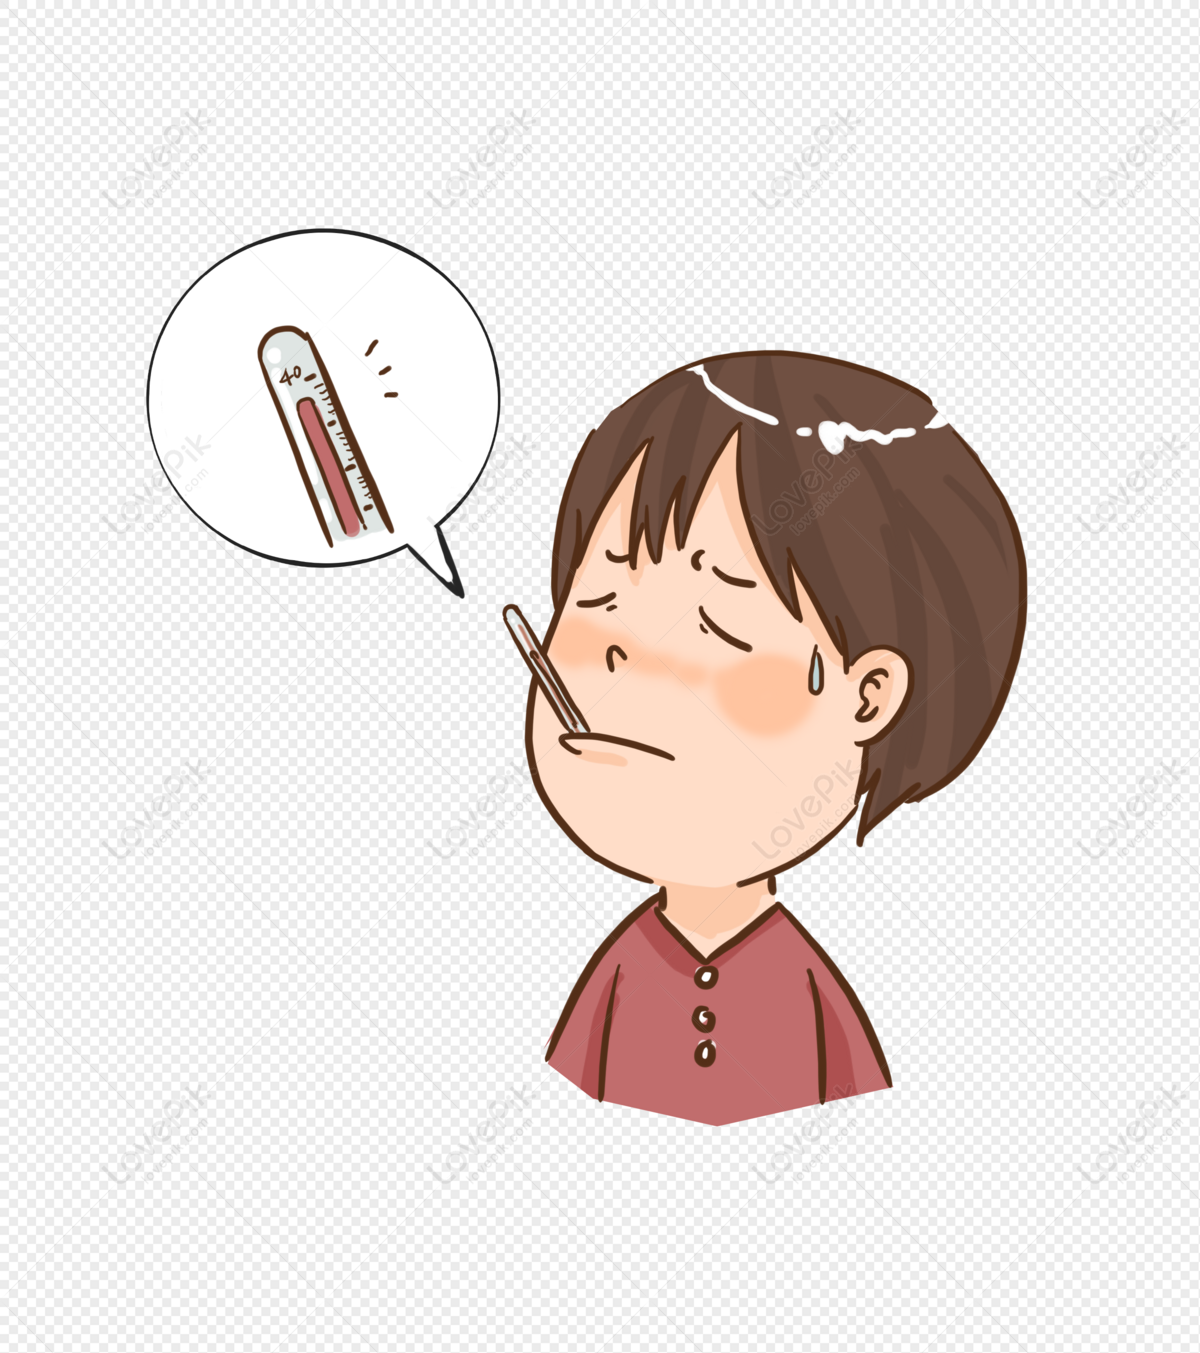 Illness With A Thermometer To Measure Body Temperature Free PNG And Clipart  Image For Free Download - Lovepik | 401641779